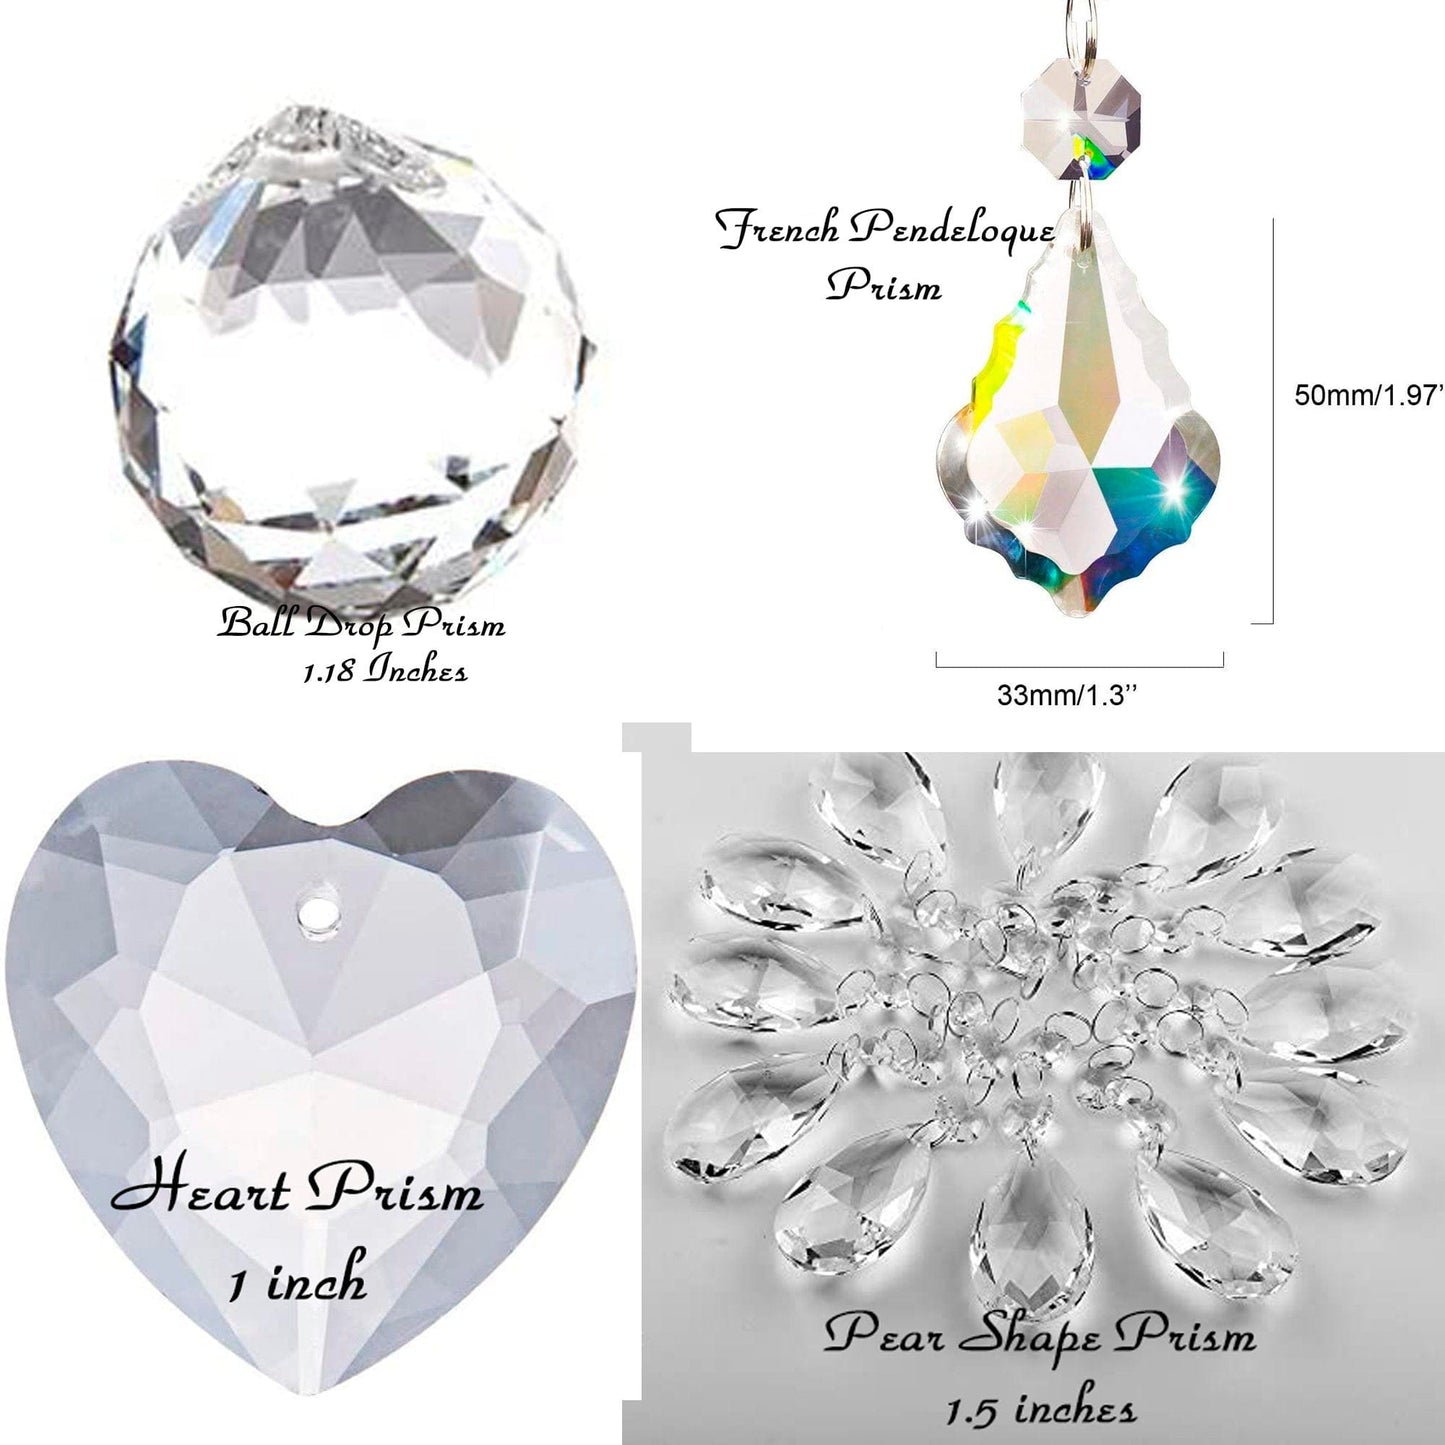 Non Swarovski crystal prisms that include a ball drop 1.18”, Pendalogue 1.97”
, heart 1”  and pear shape 1.5 all rainbow makers